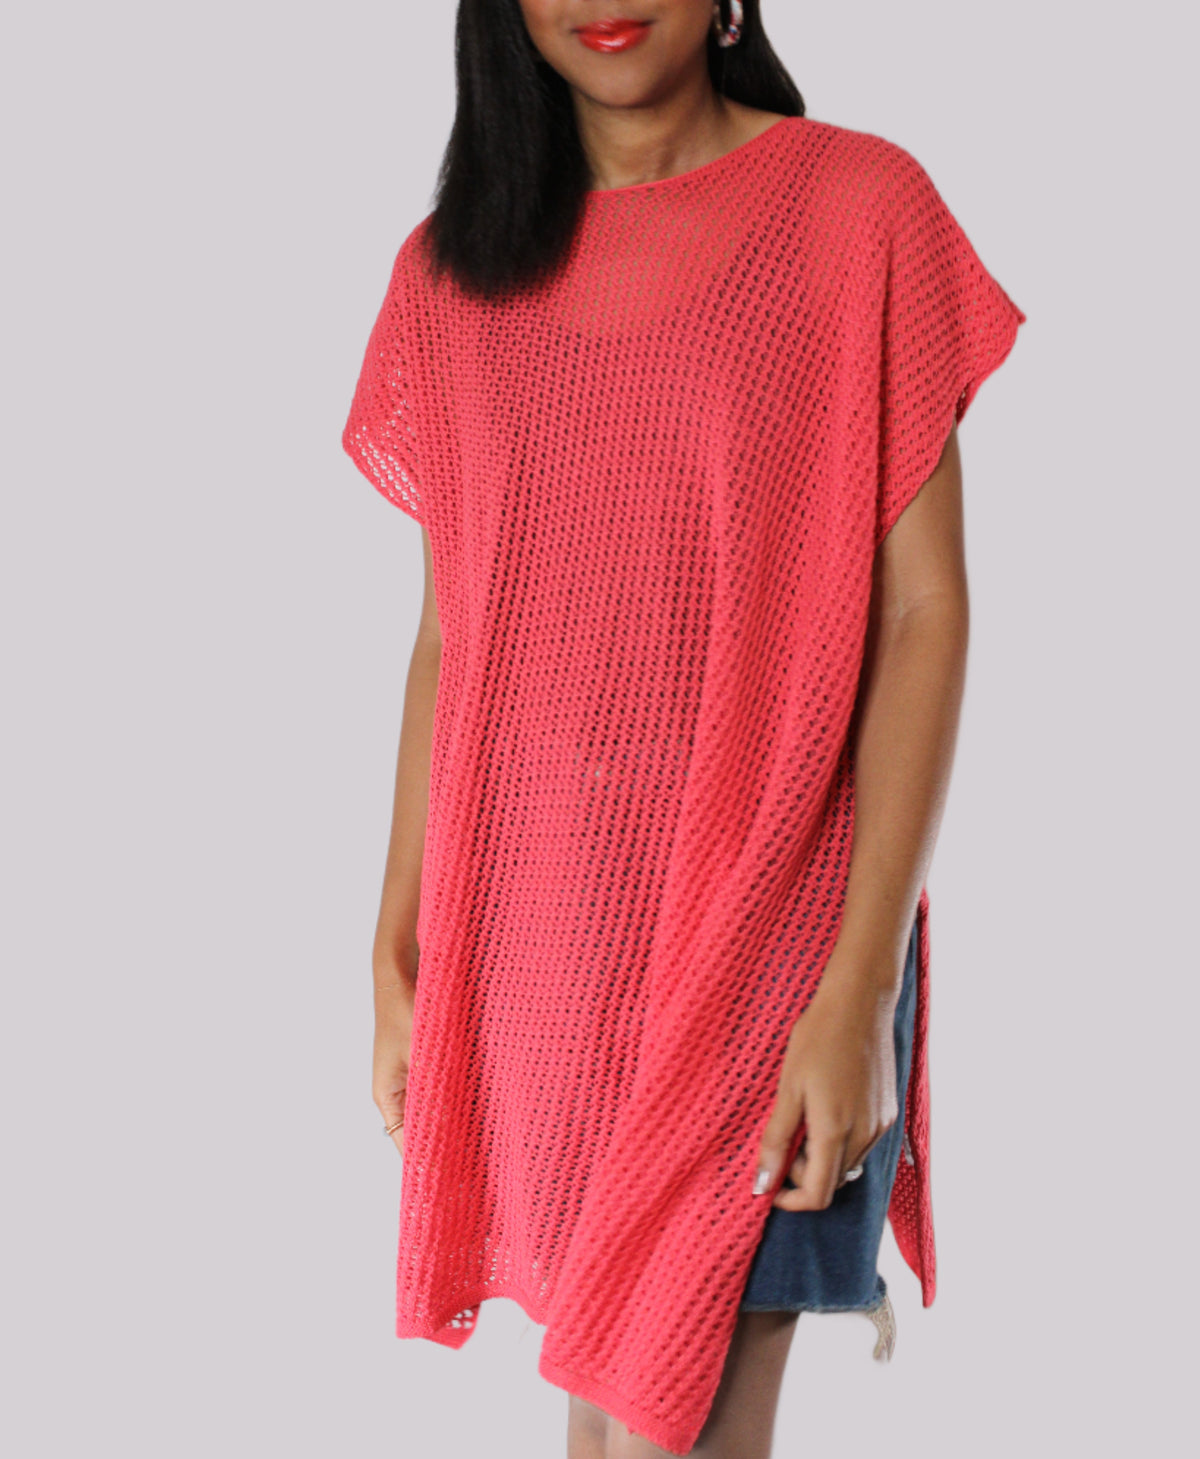 The Beach to Town Tunic